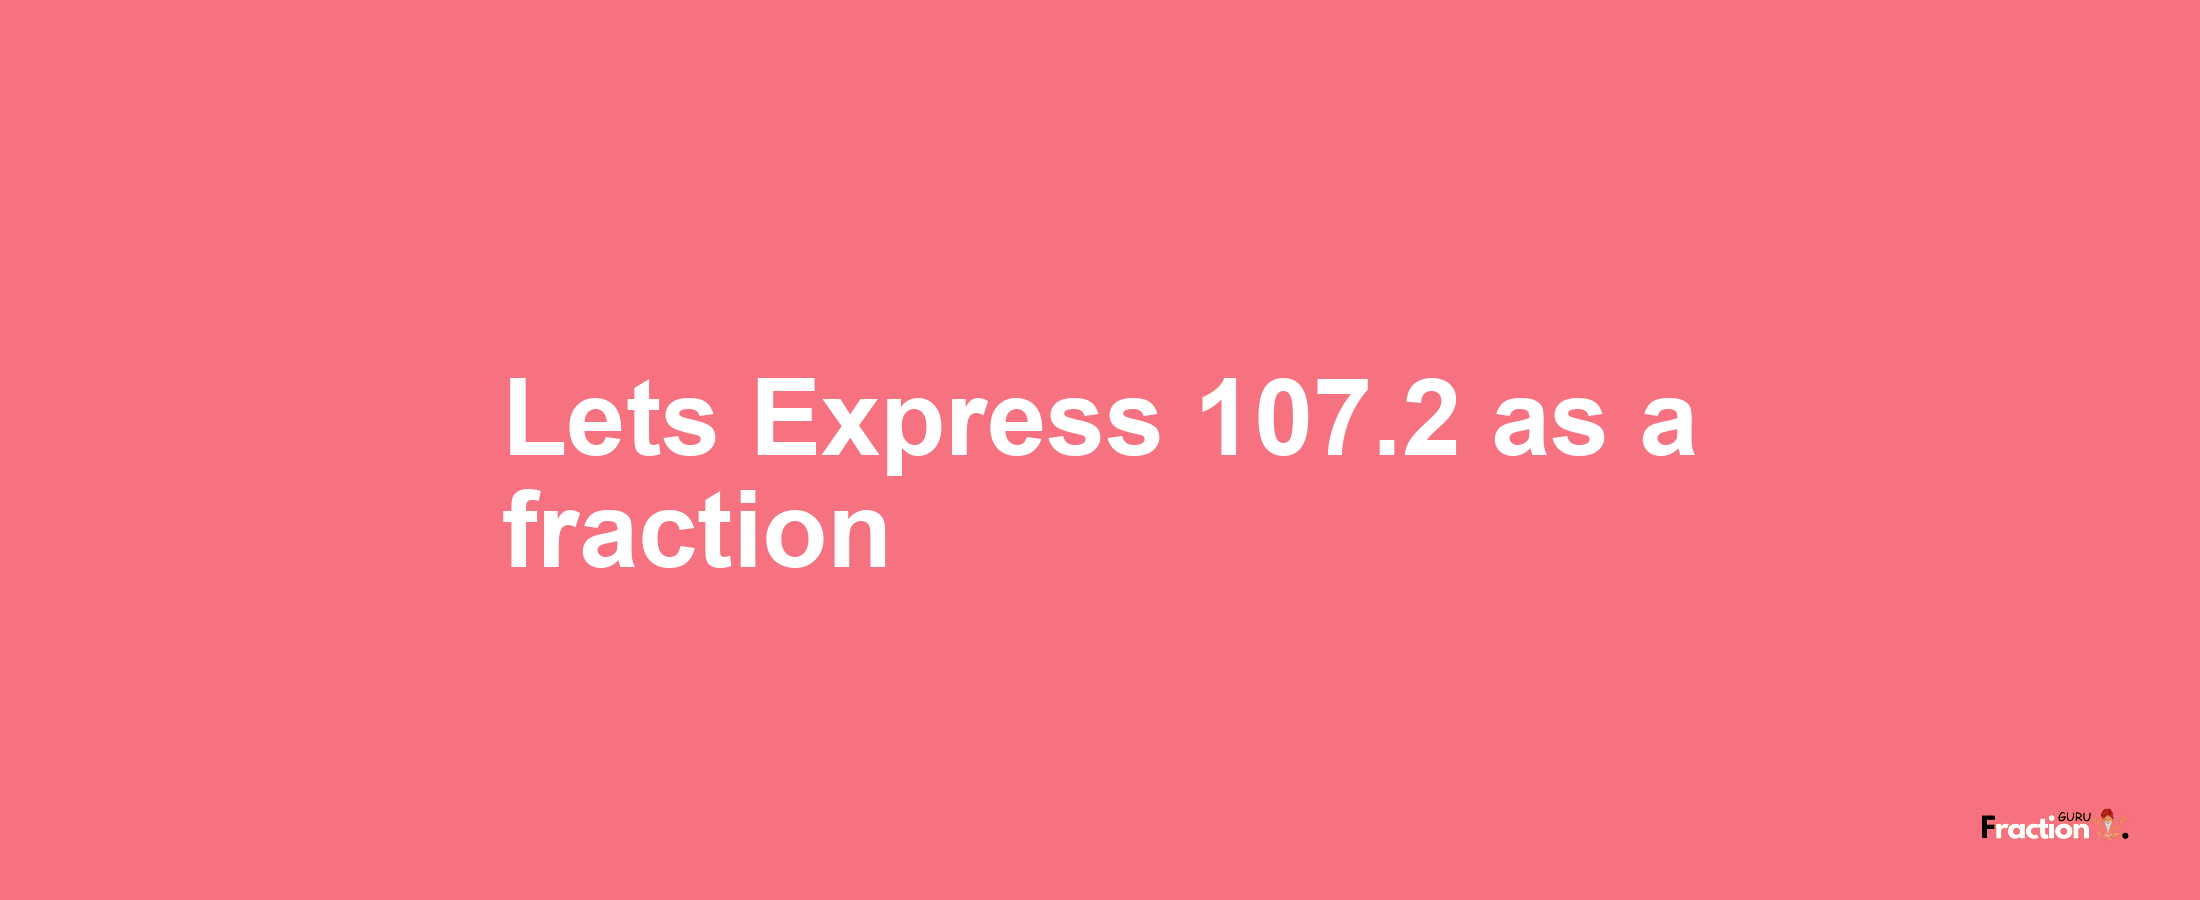 Lets Express 107.2 as afraction